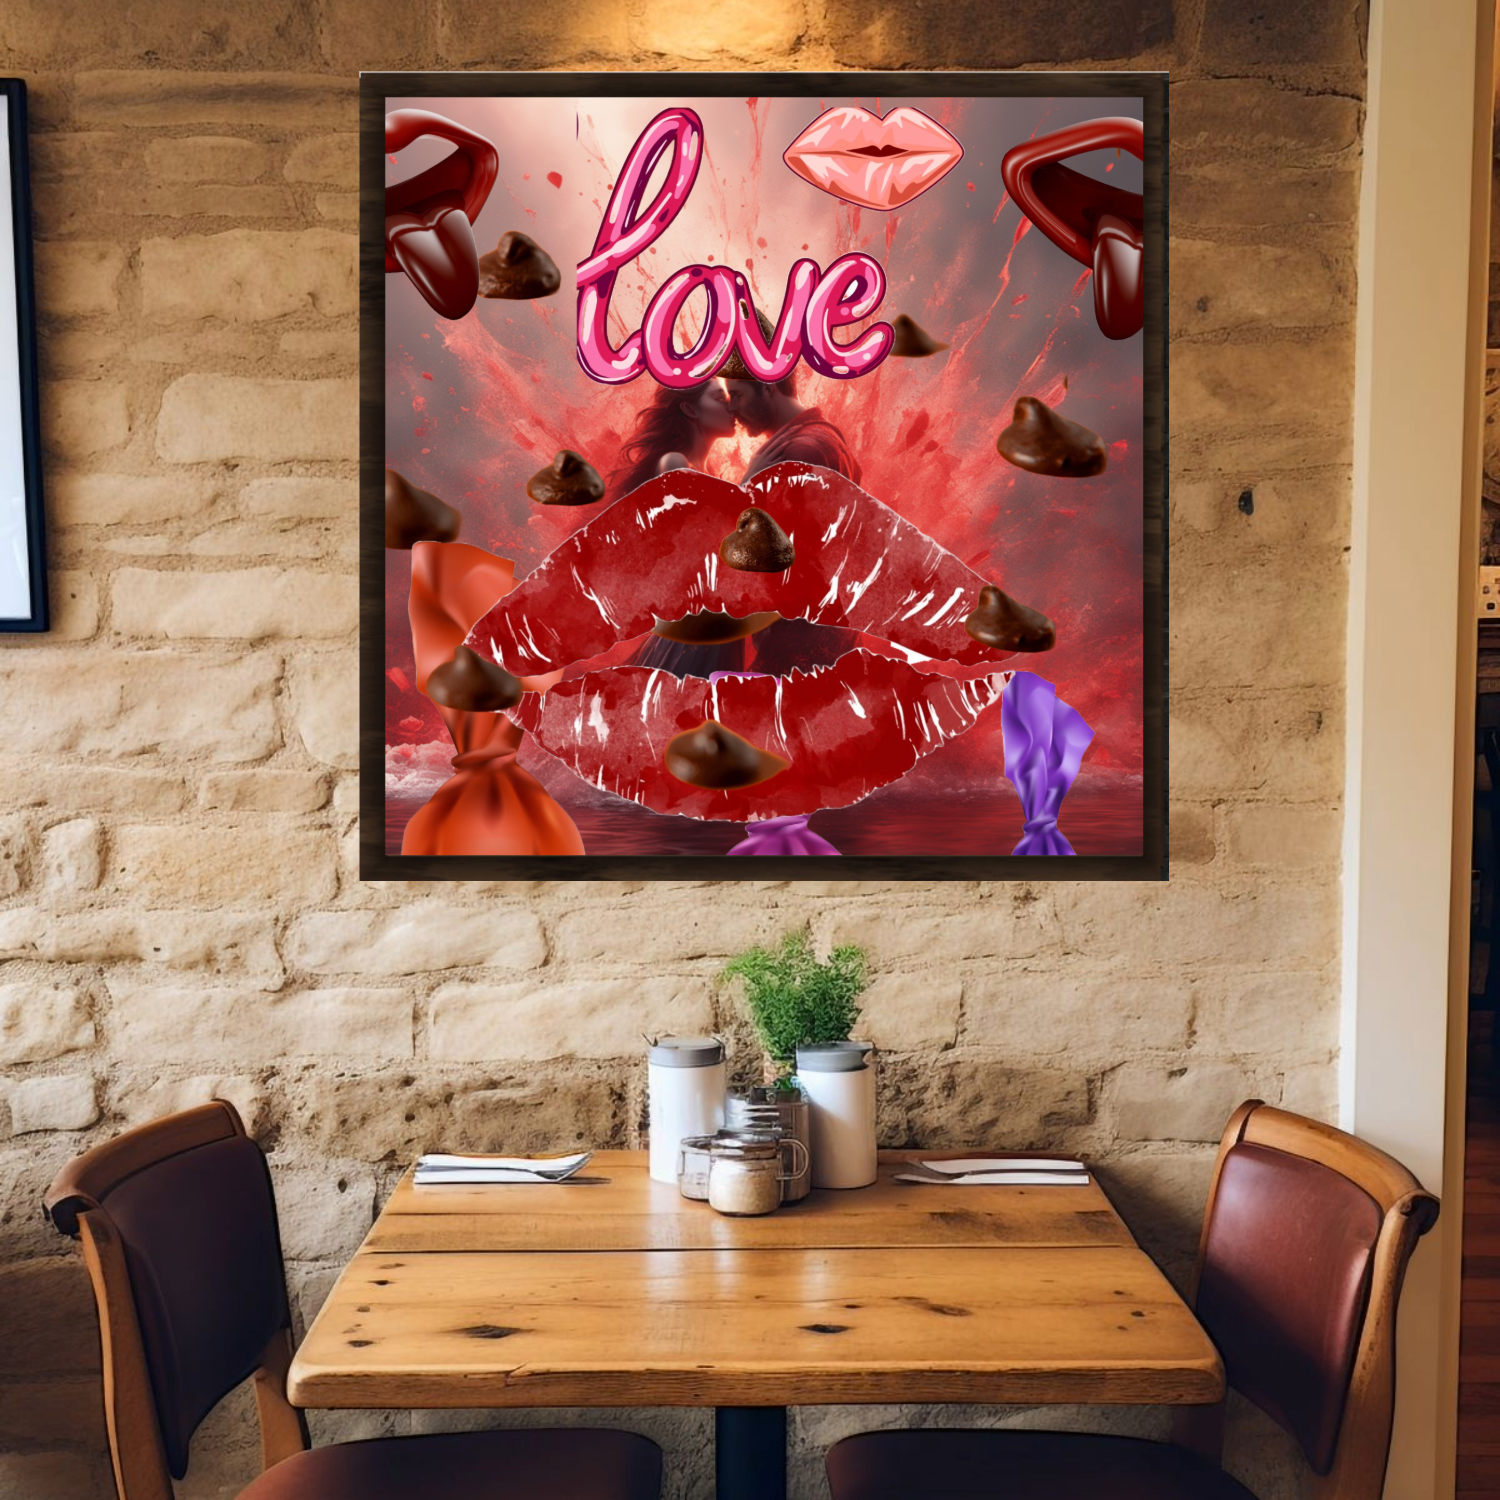 Wall Art LOVE KISSES CHOCOLATE Canvas Print Painting Original Giclee 32X32 + Frame Love Nice Beauty Fun Design Fit Hot House Home Office Gift Ready Hang